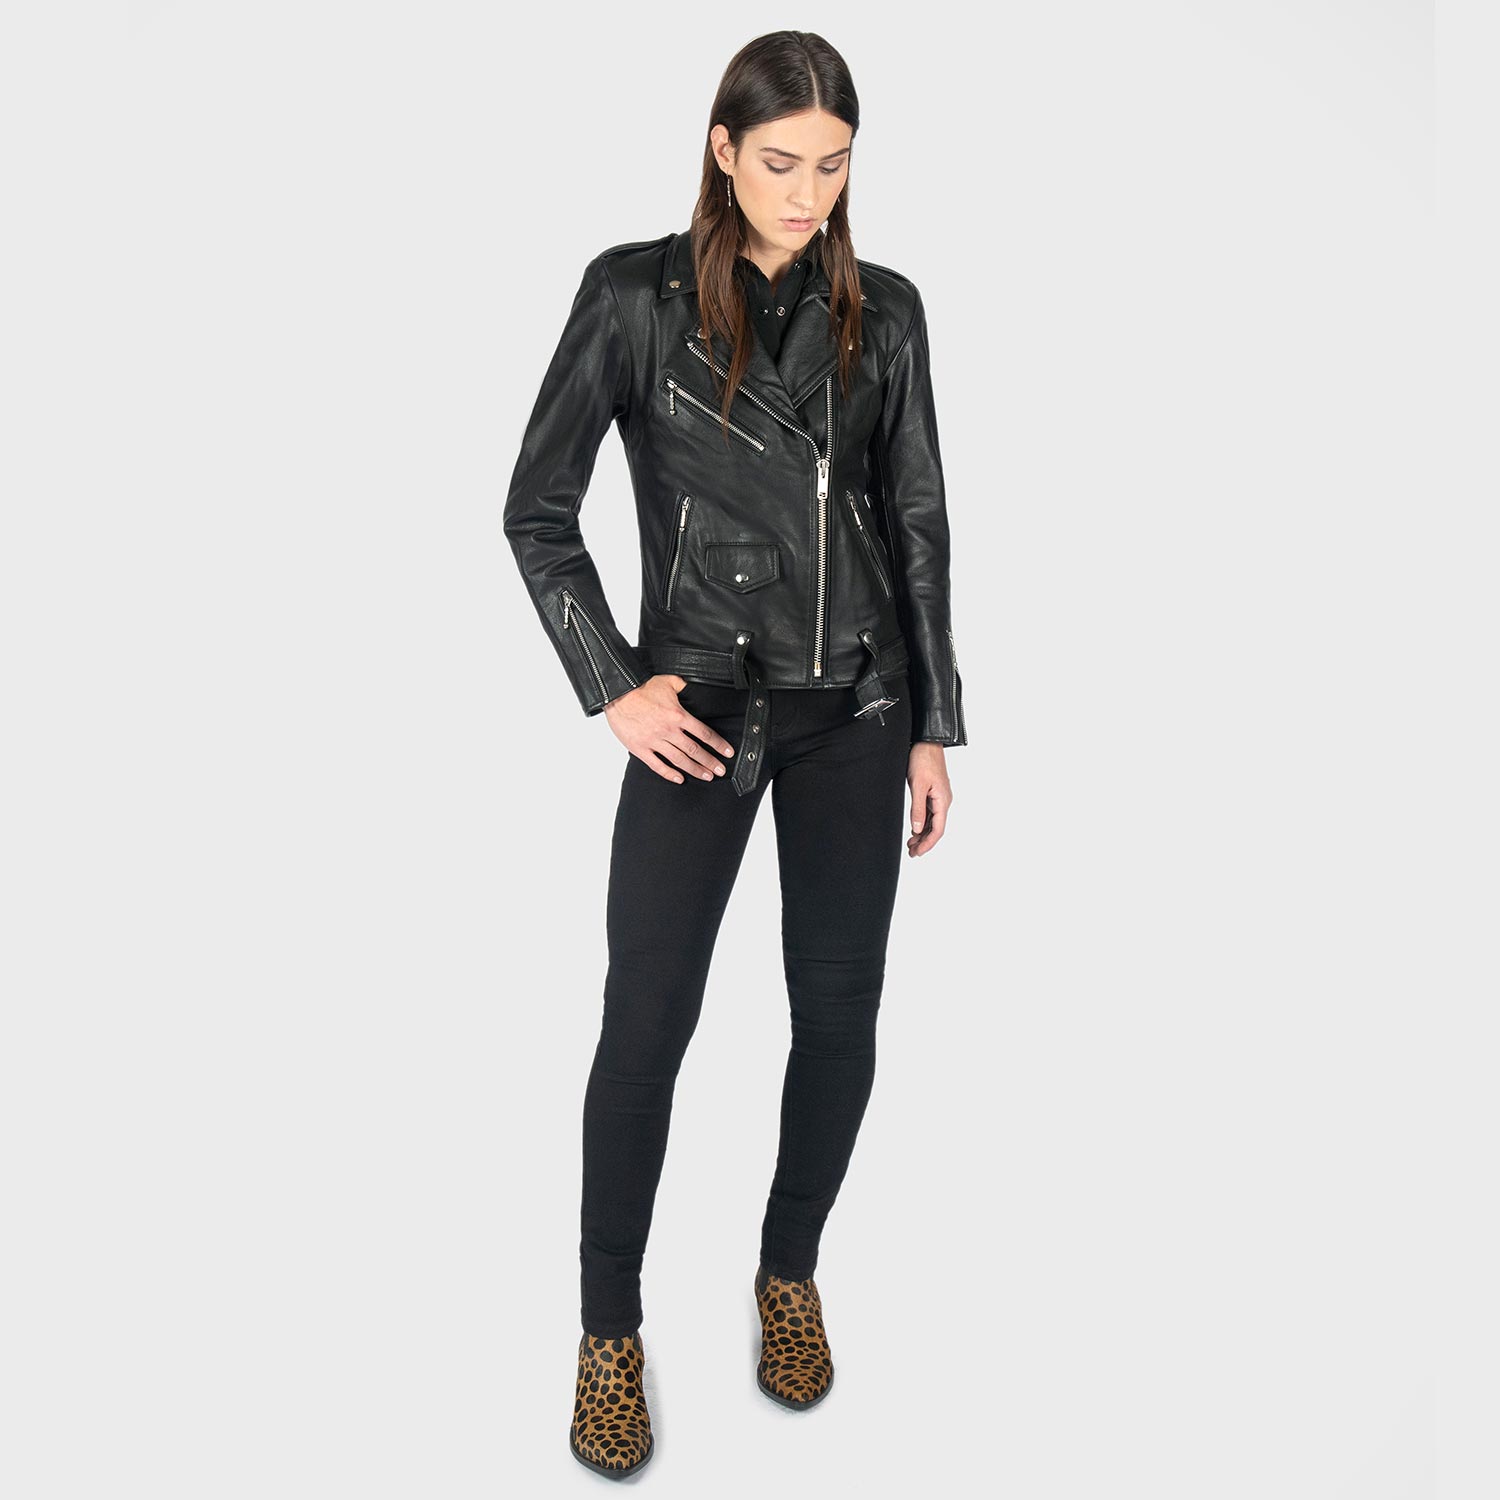 Black and Leather - Nickel Commando | Jacket To Oversized Apparel Hell Straight